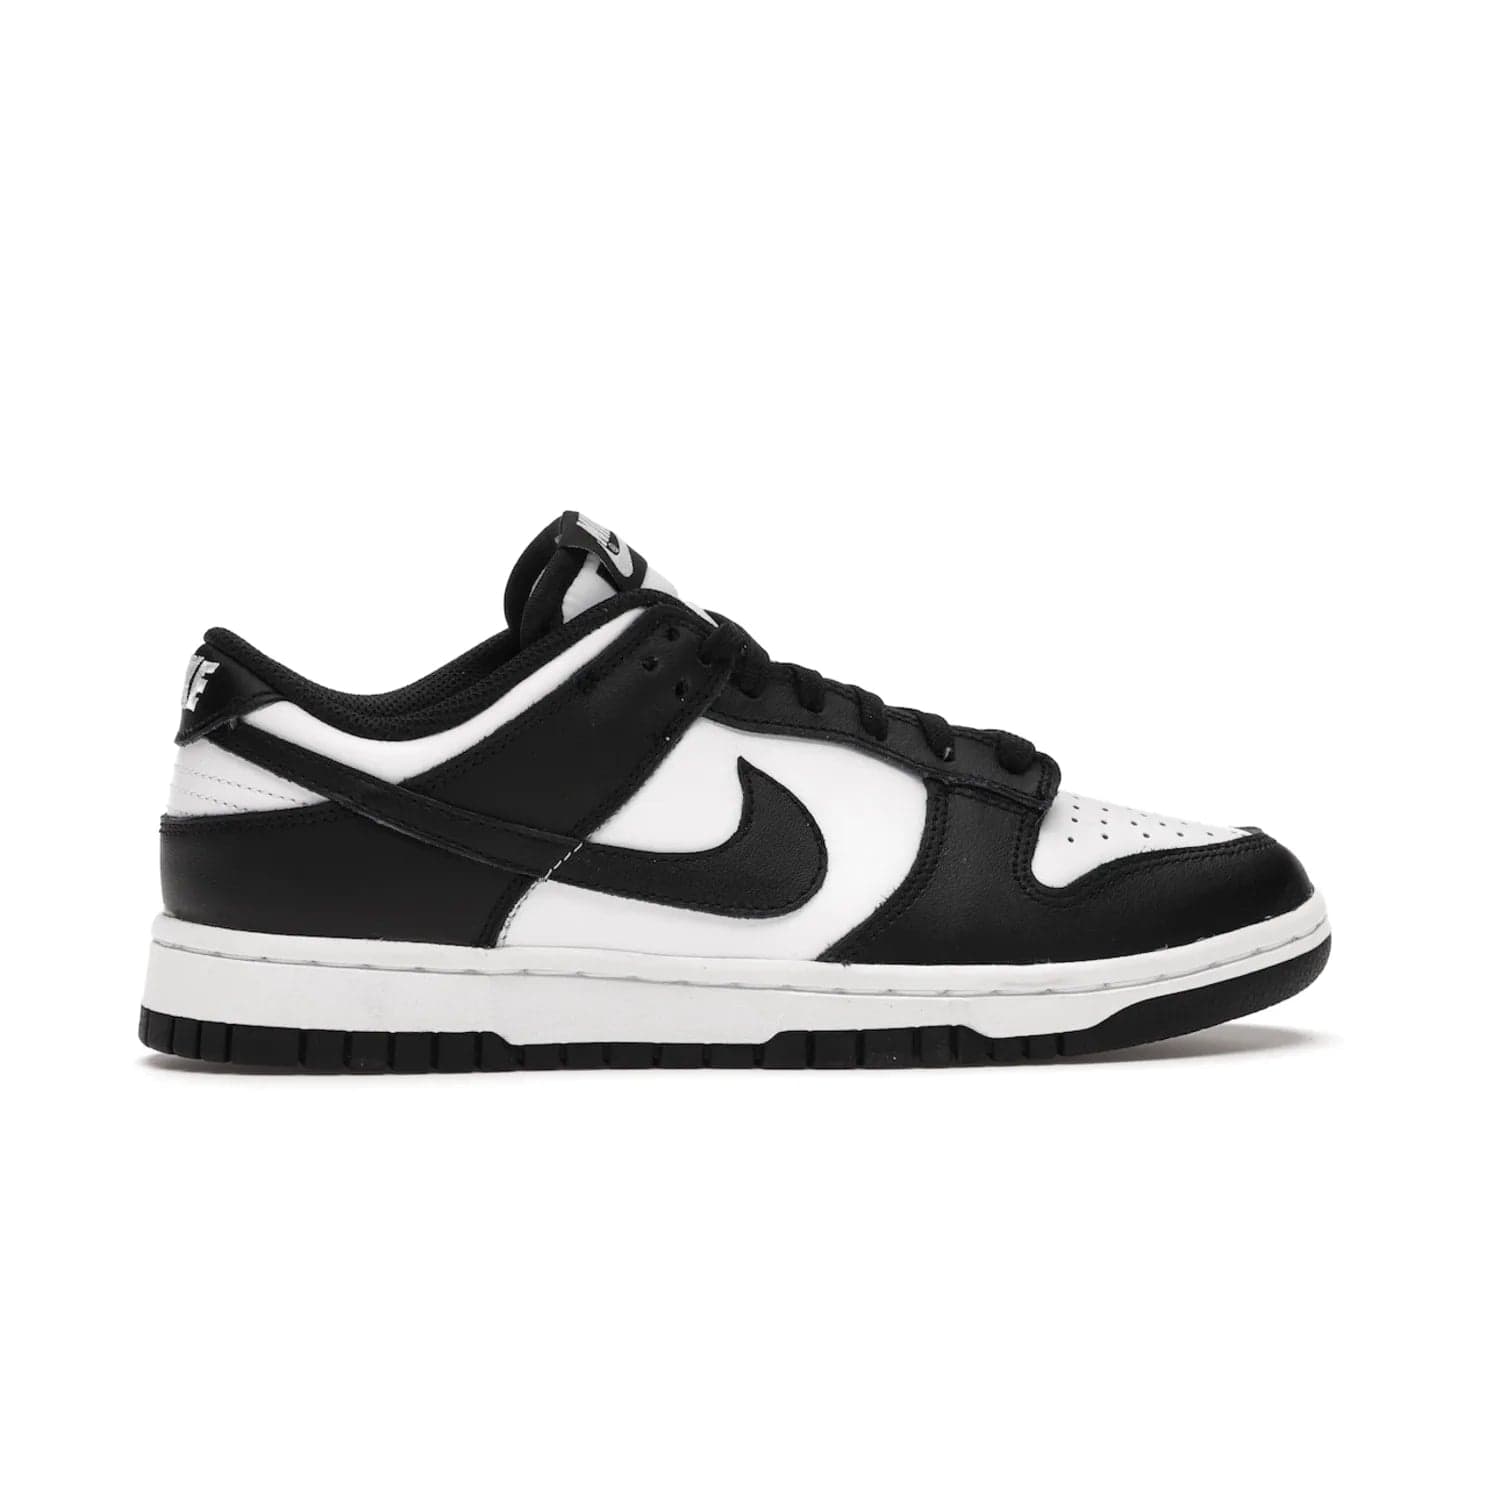 Nike Dunk Low Retro White Black Panda (2021) (Women's) - Image 36 - Only at www.BallersClubKickz.com - Say hello to the new Nike Dunk Low Retro White Black Panda (2021) (Women's)! White & black leather upper with Nike Swoosh logo. Get your pair for $100 in March 2021! Shop now!